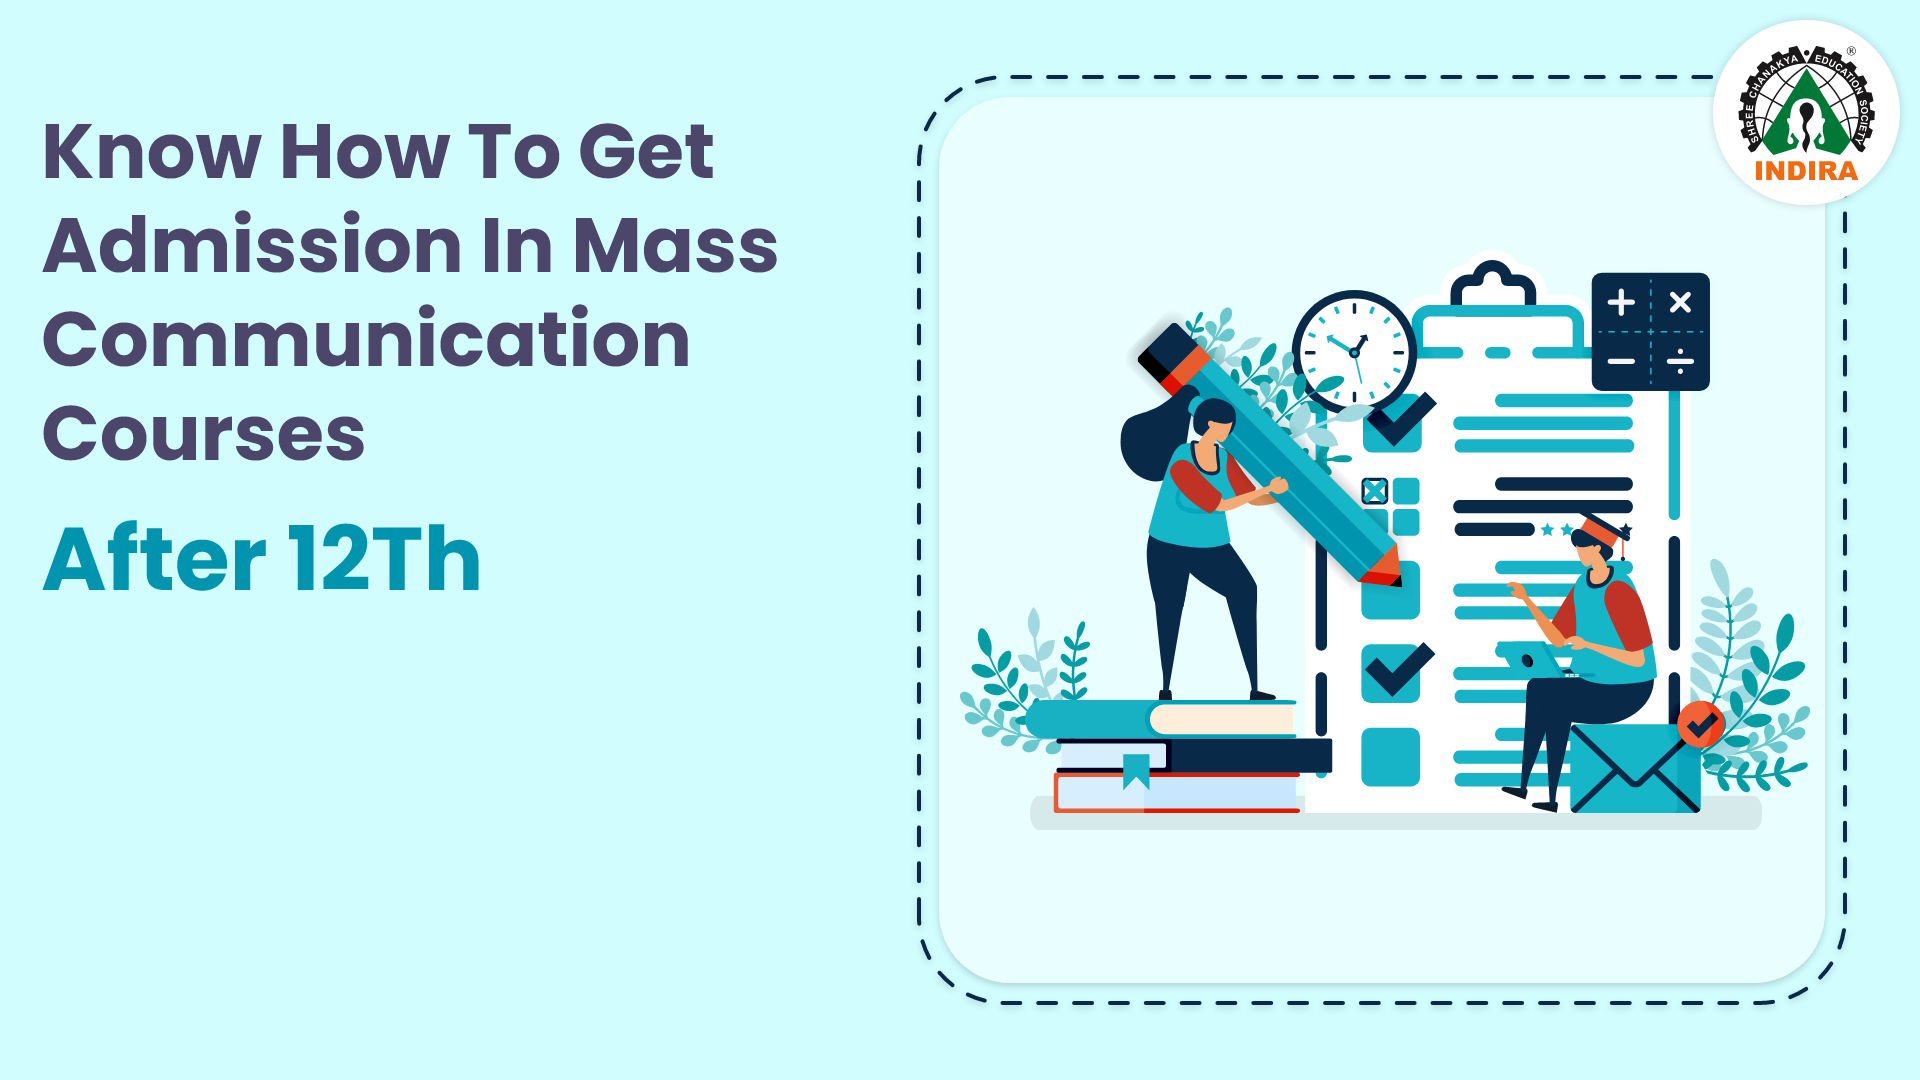 Know How To Get Admission In Mass Communication Courses After 12 th